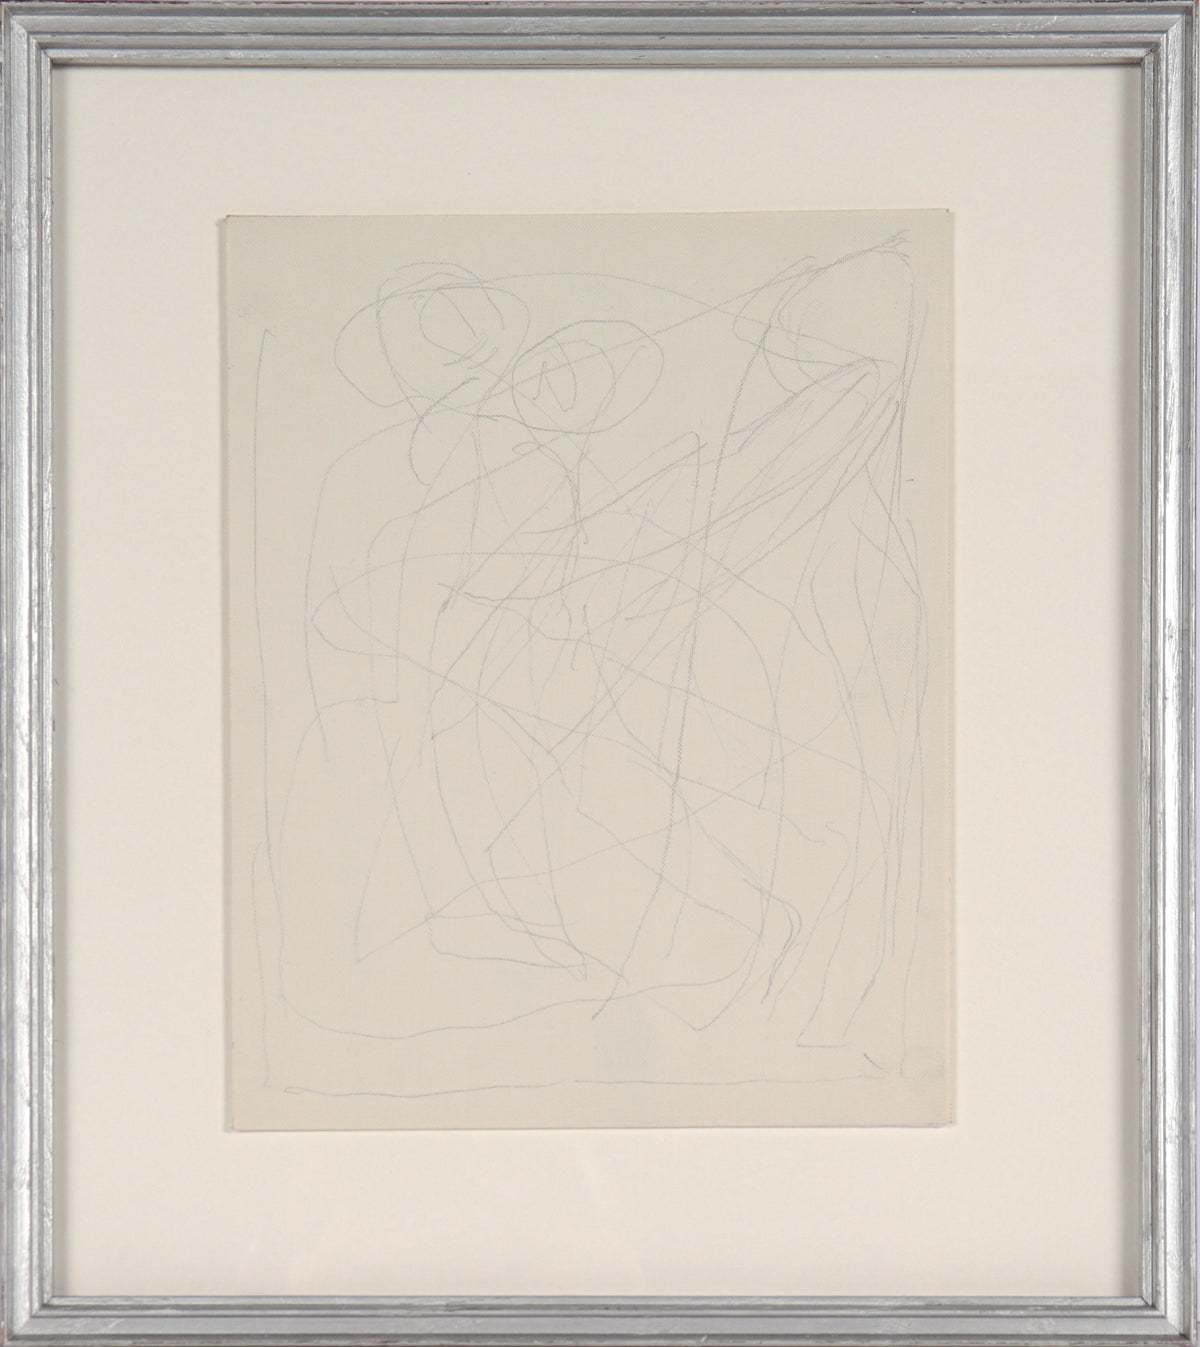 Abstracted Figurative Grouping&lt;br&gt;Graphite on Canvas Paper&lt;br&gt;&lt;br&gt;#13469